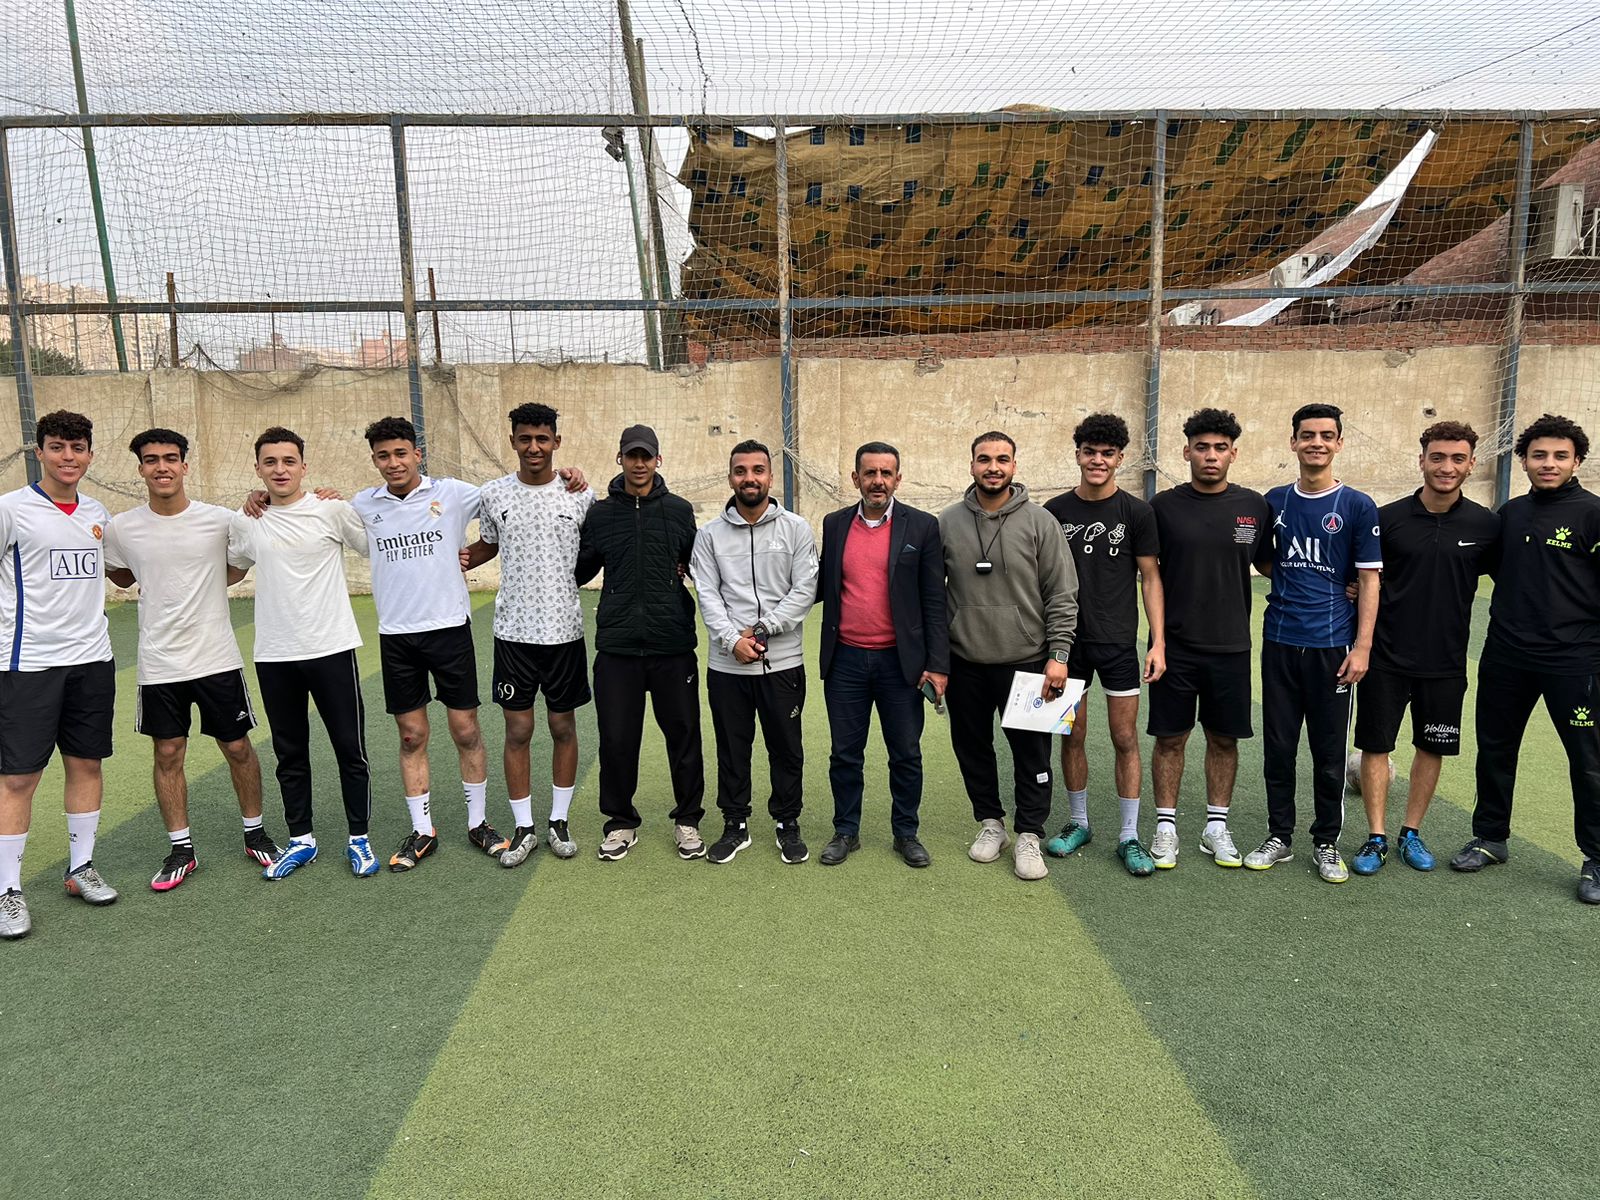 The launch of the Thebes Futsal League